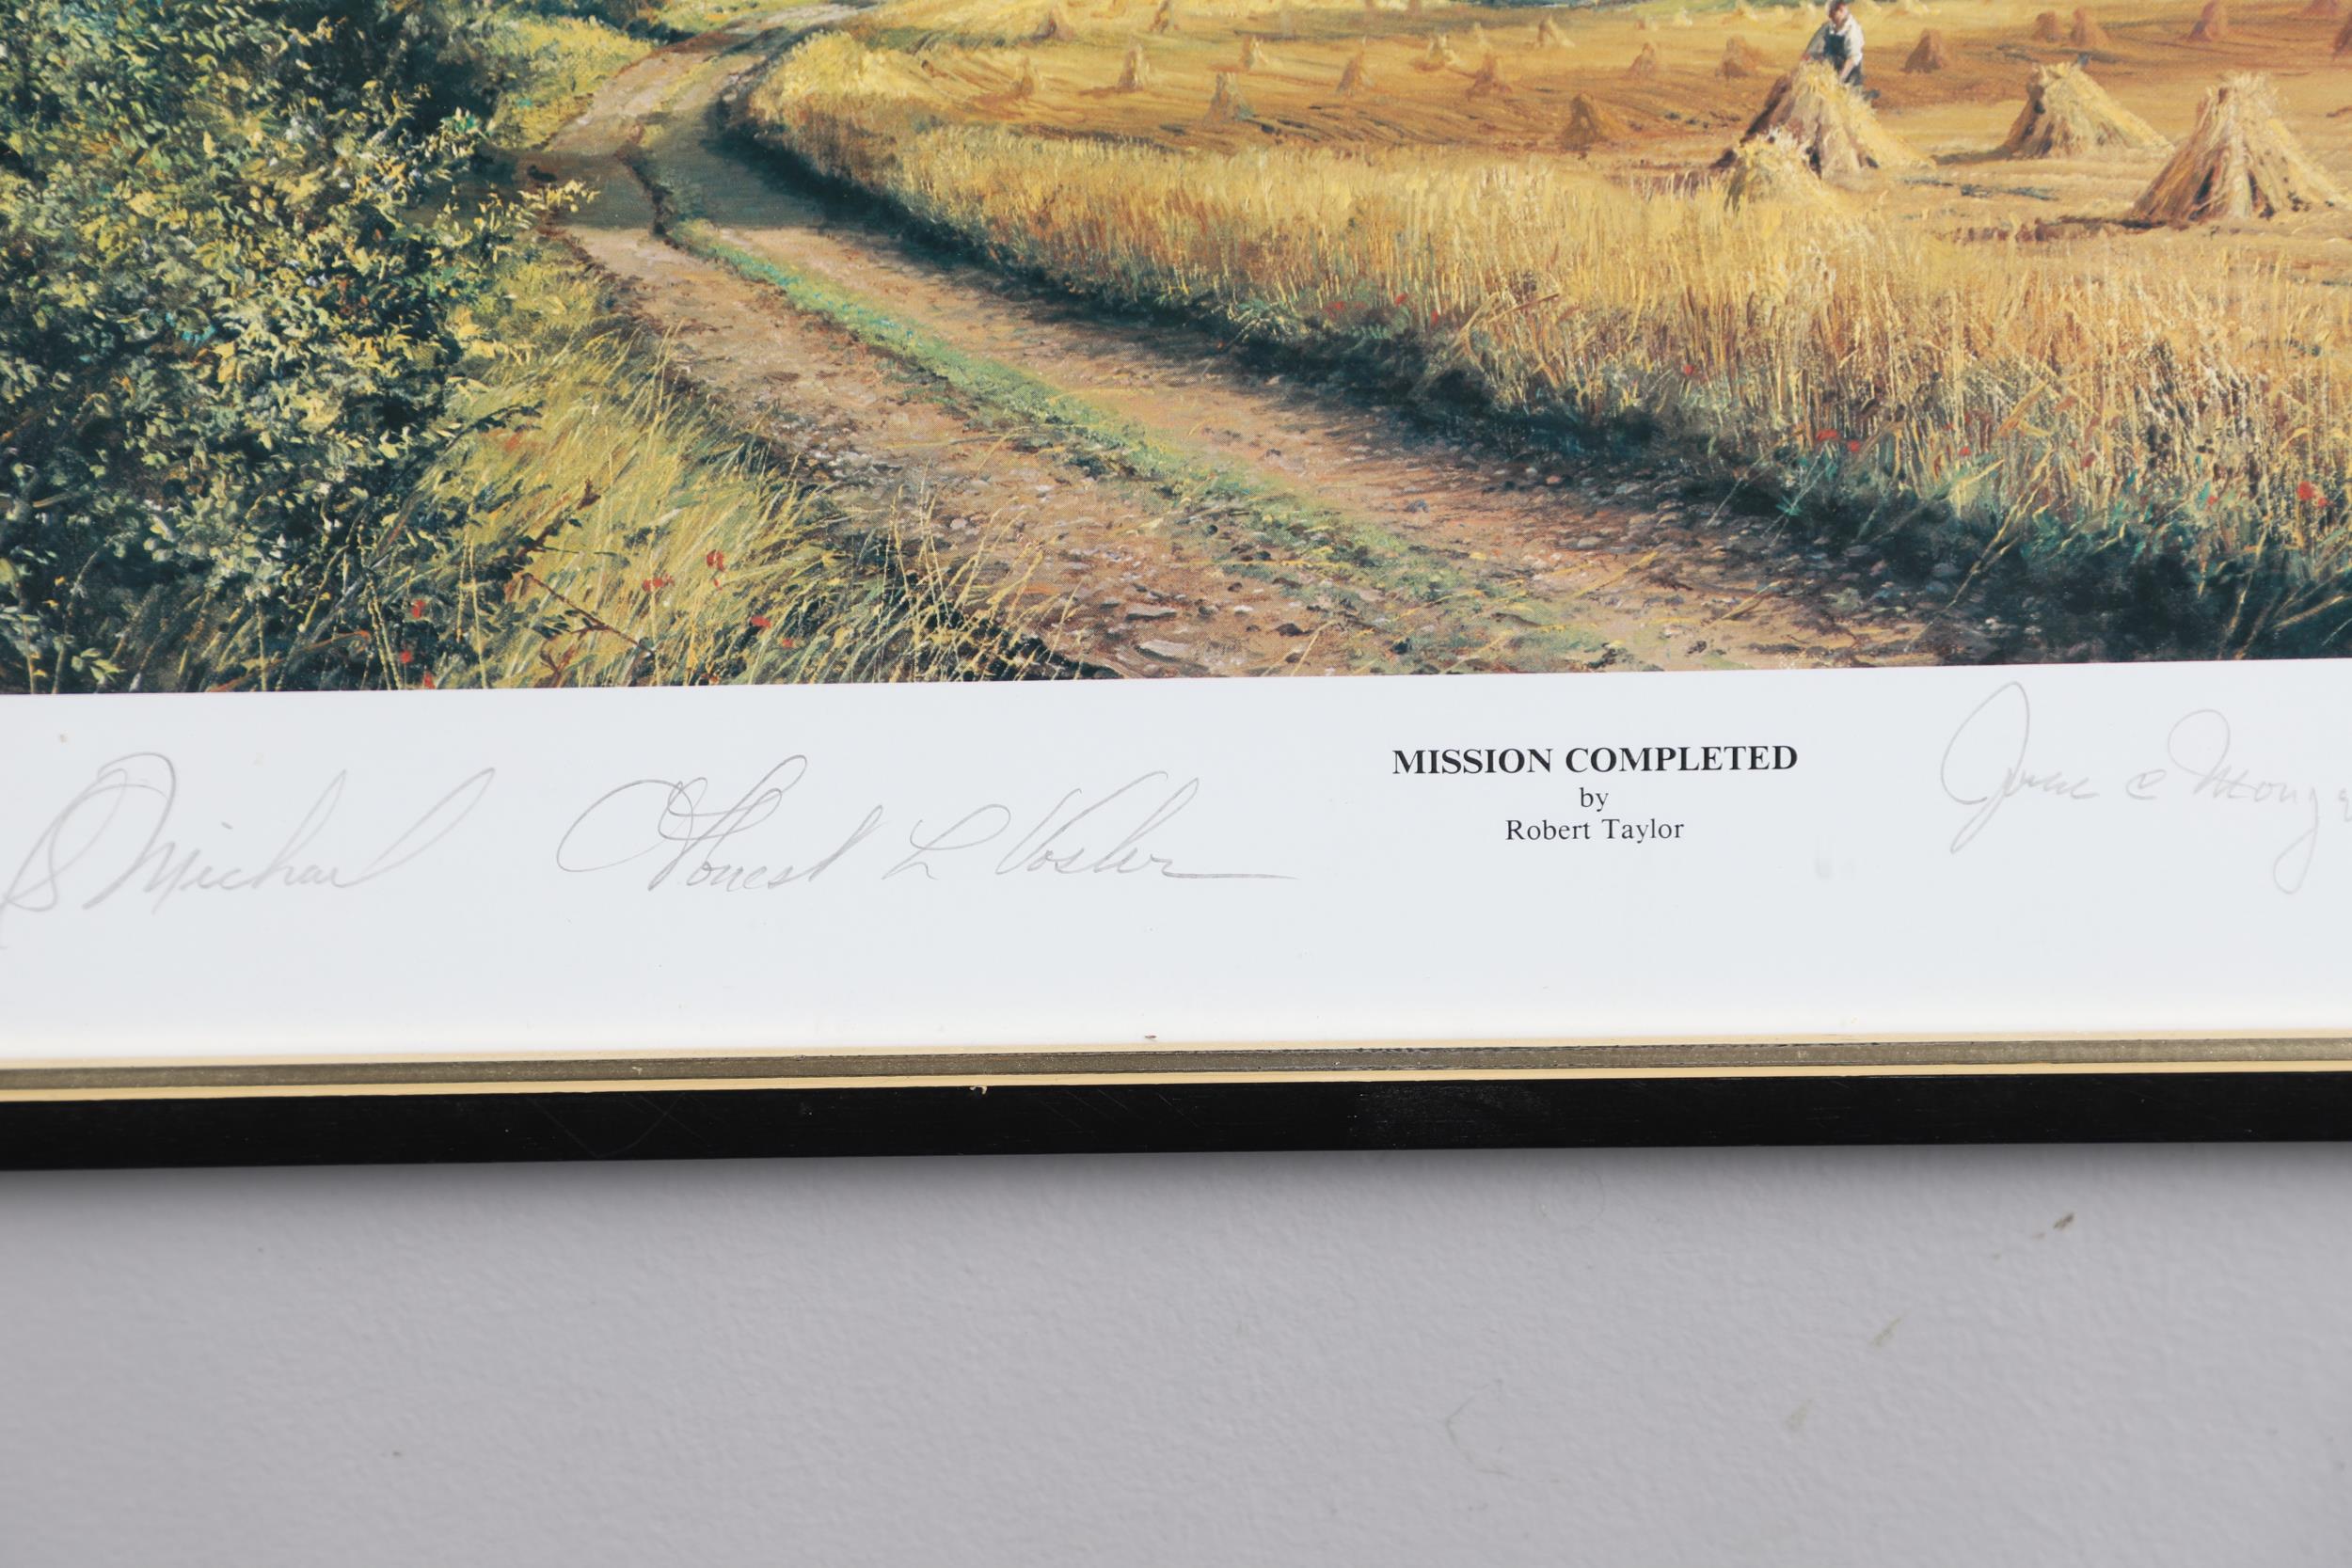 MISSION COMPLETED BY ROBERT TAYLOR, COLOUR PRINT SIGNED BY THE ARTIST AND FIVE PILOTS. - Image 4 of 7